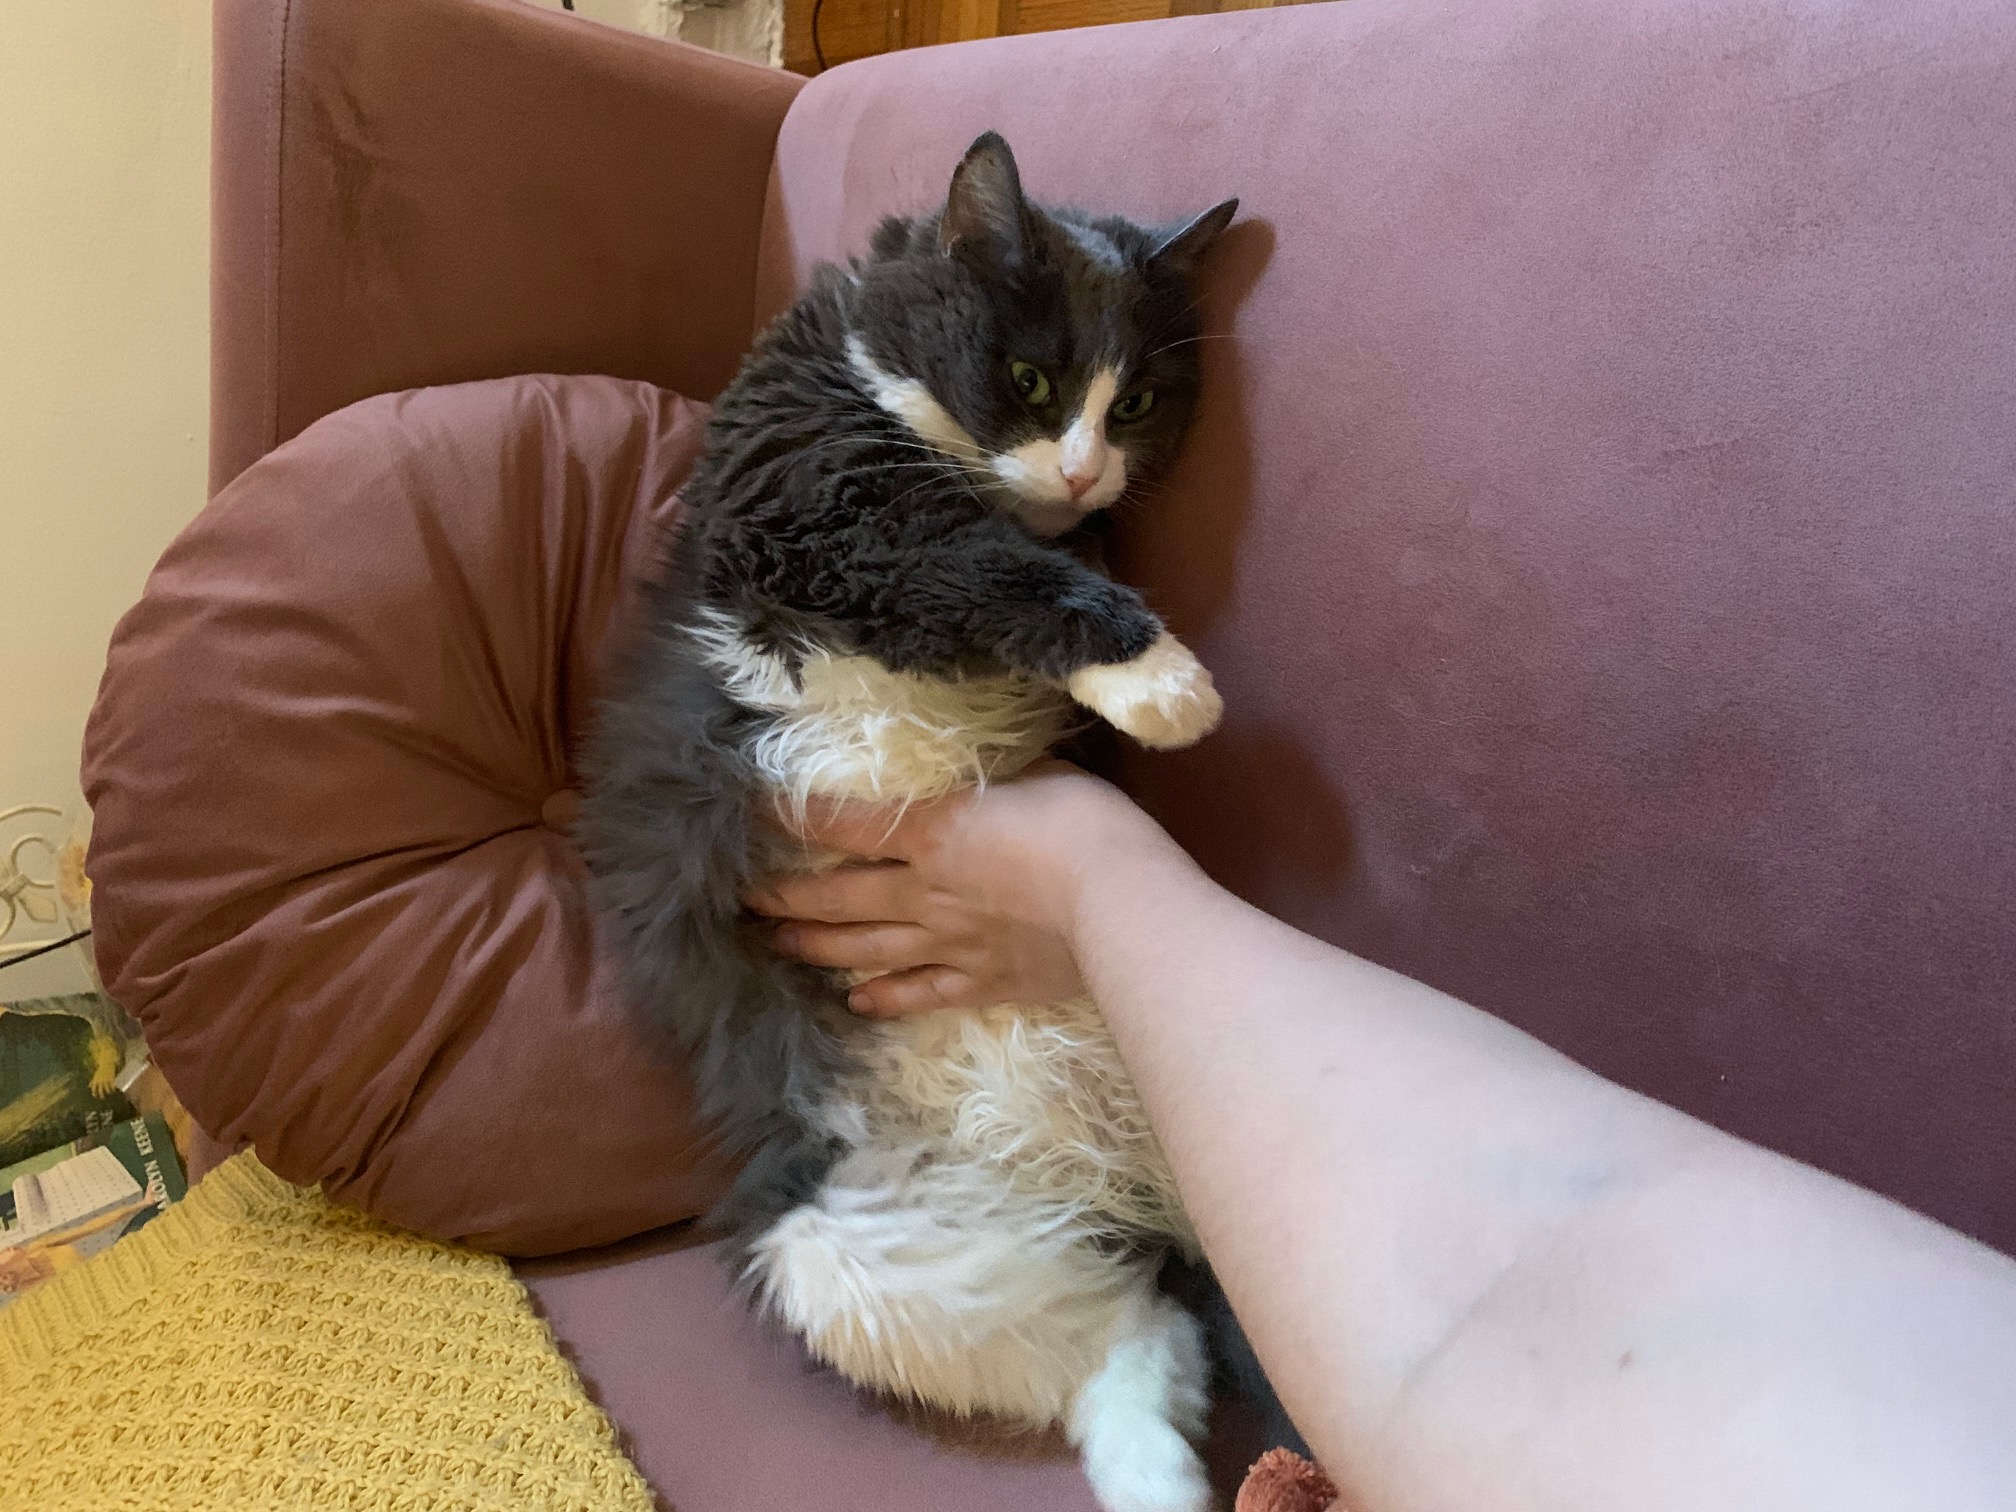 A long-haired gray-and-white cat with mint green eyes getting a belly rub on a dusty rose-colored velvet couch.